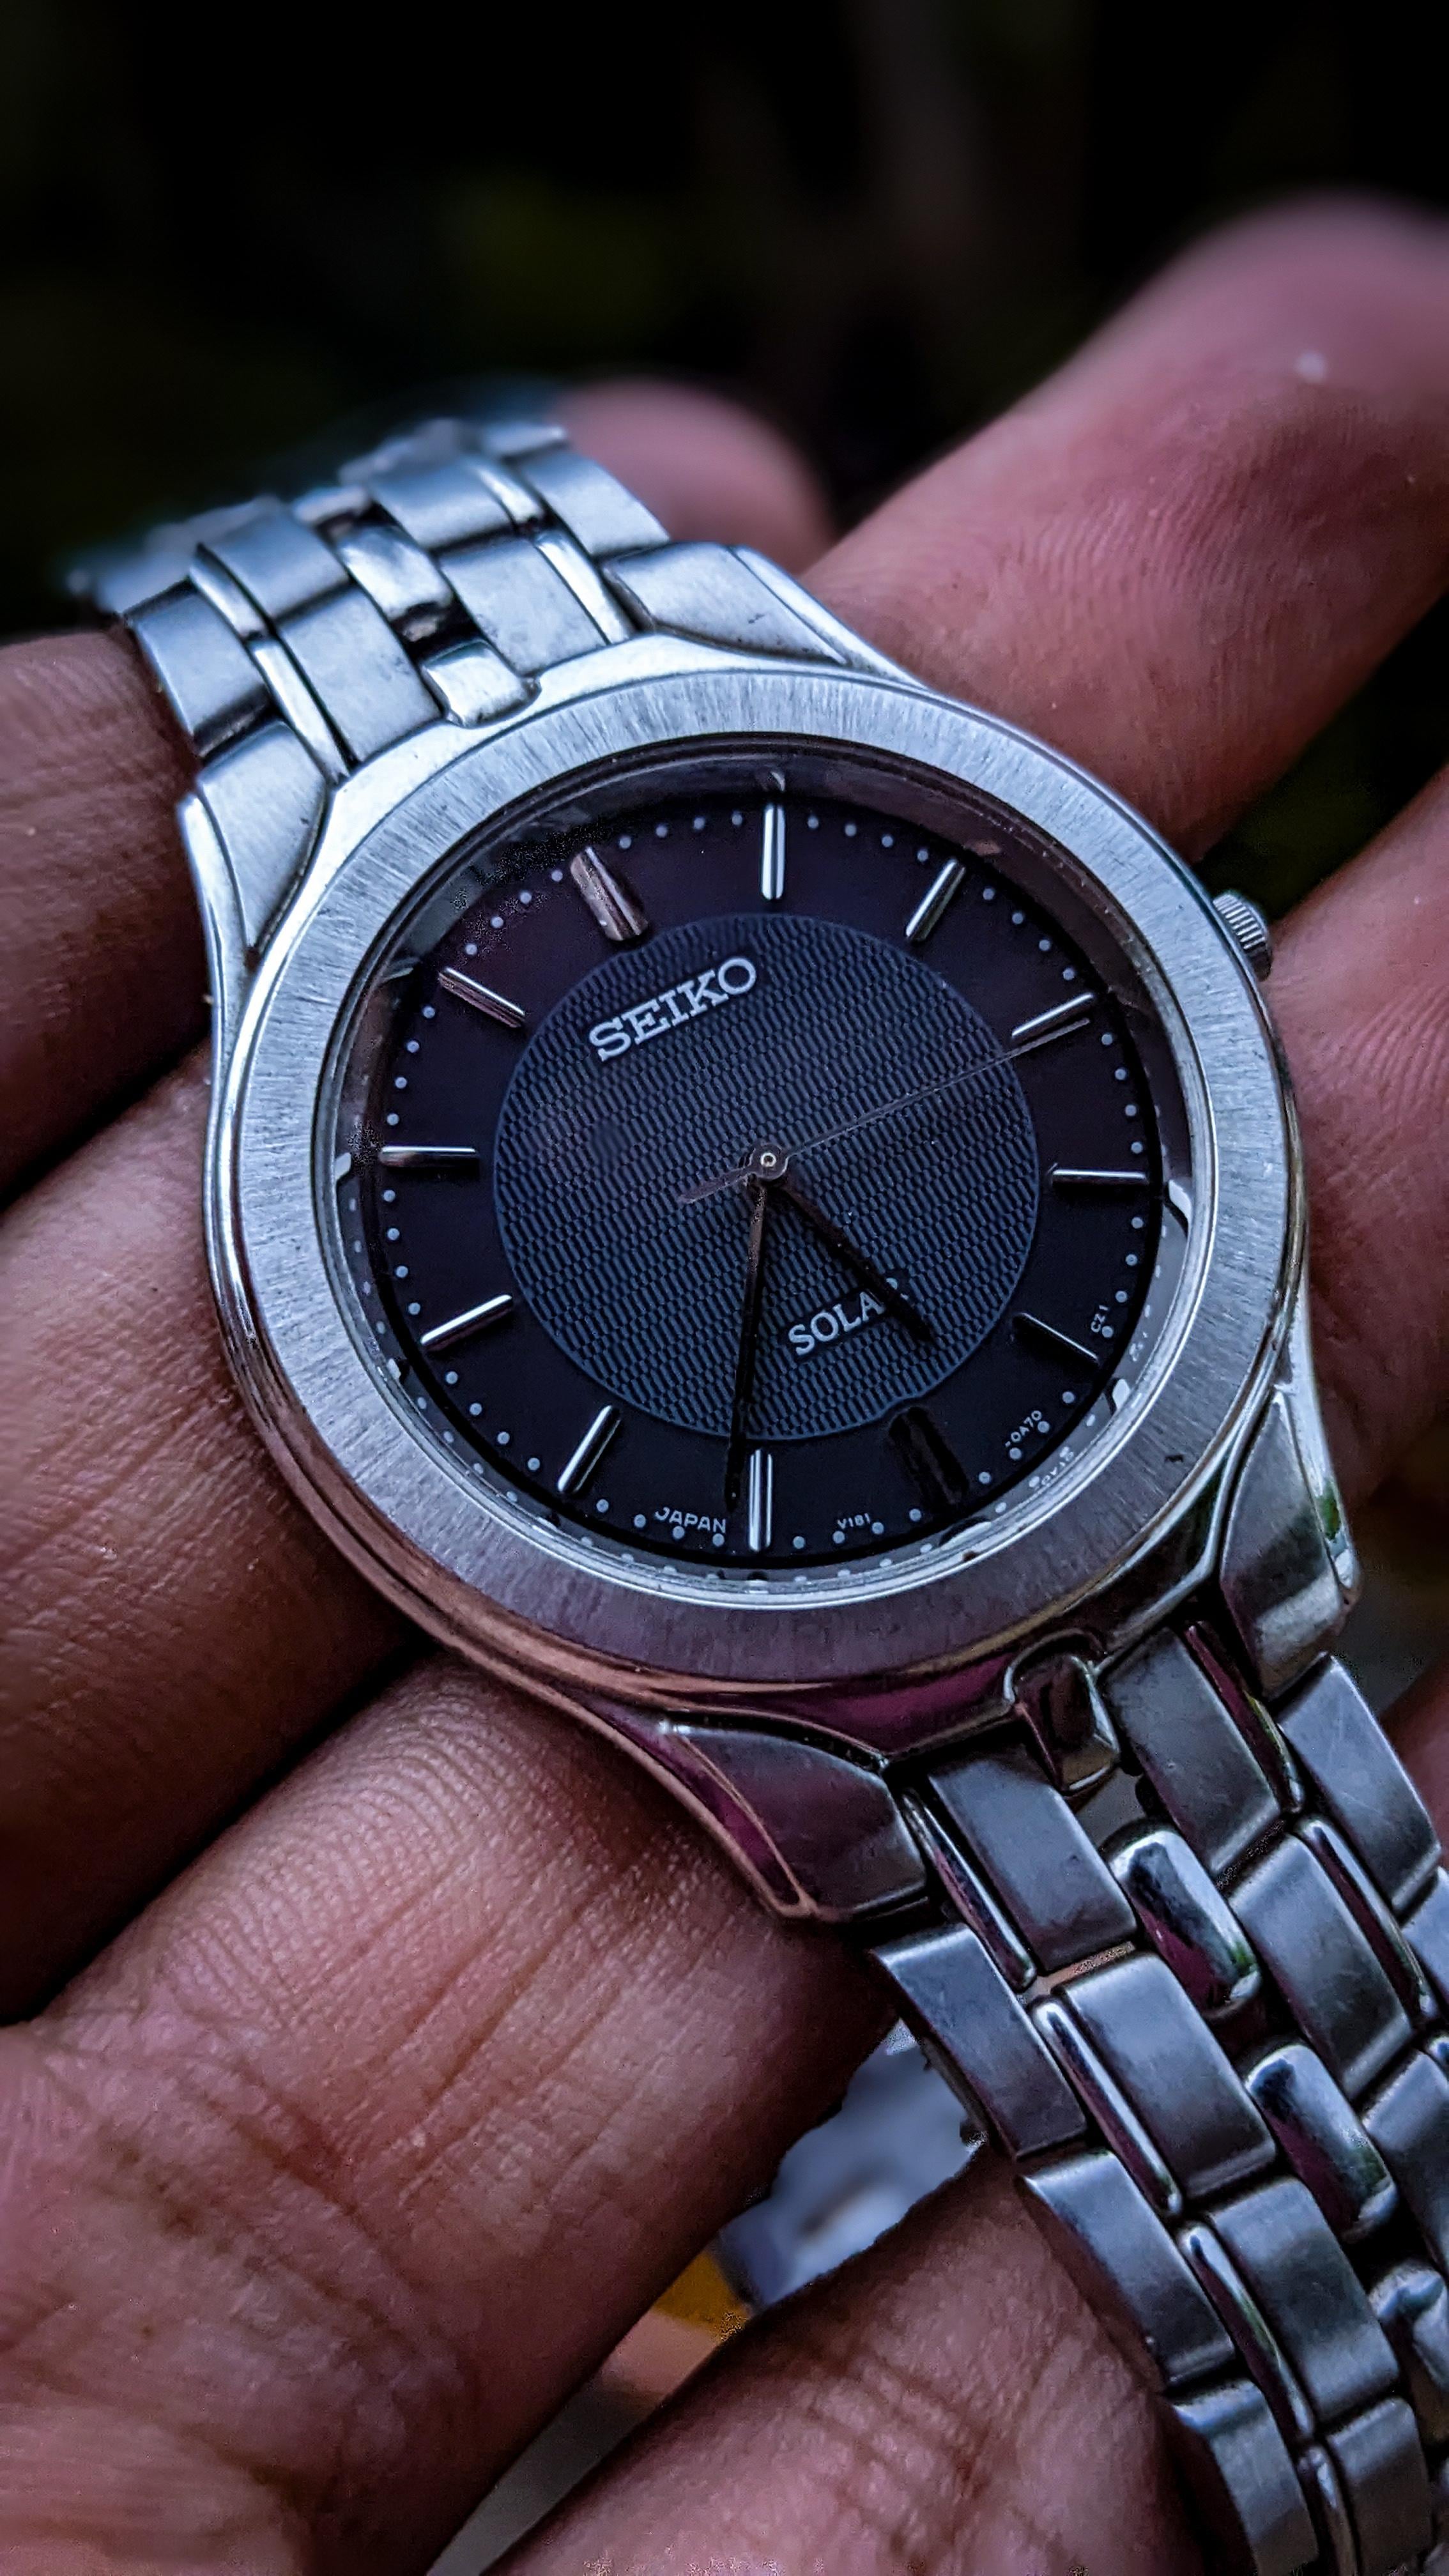 WTS] Seiko JDM solar vintage watch v181-0a50 in just 99